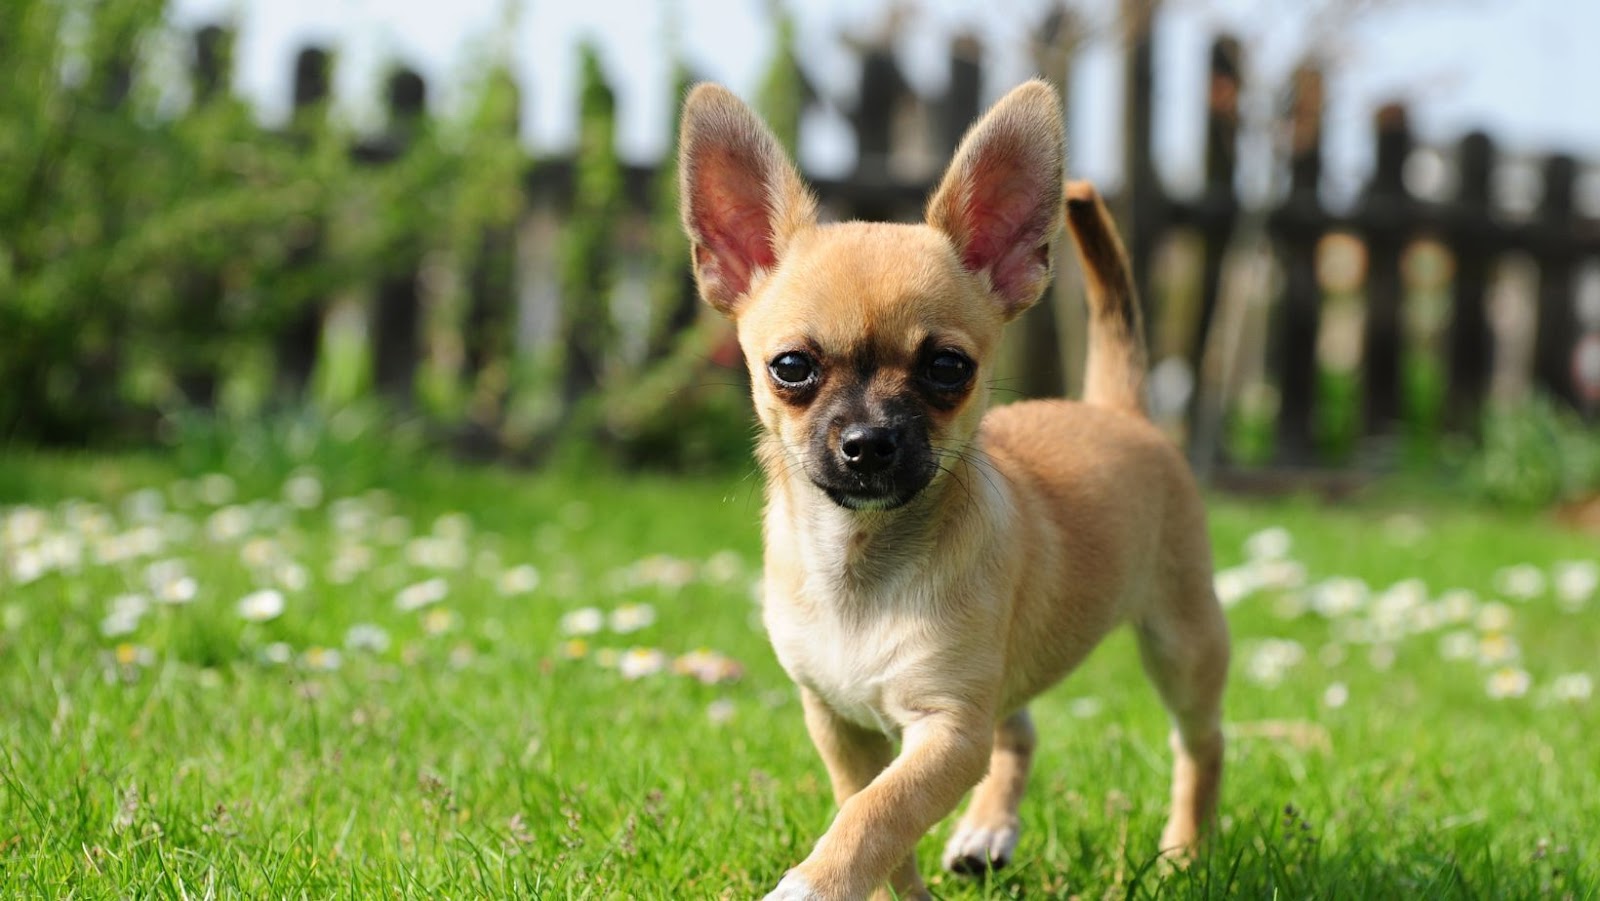 teacup chihuahua puppies for sale near me under $300 dollars